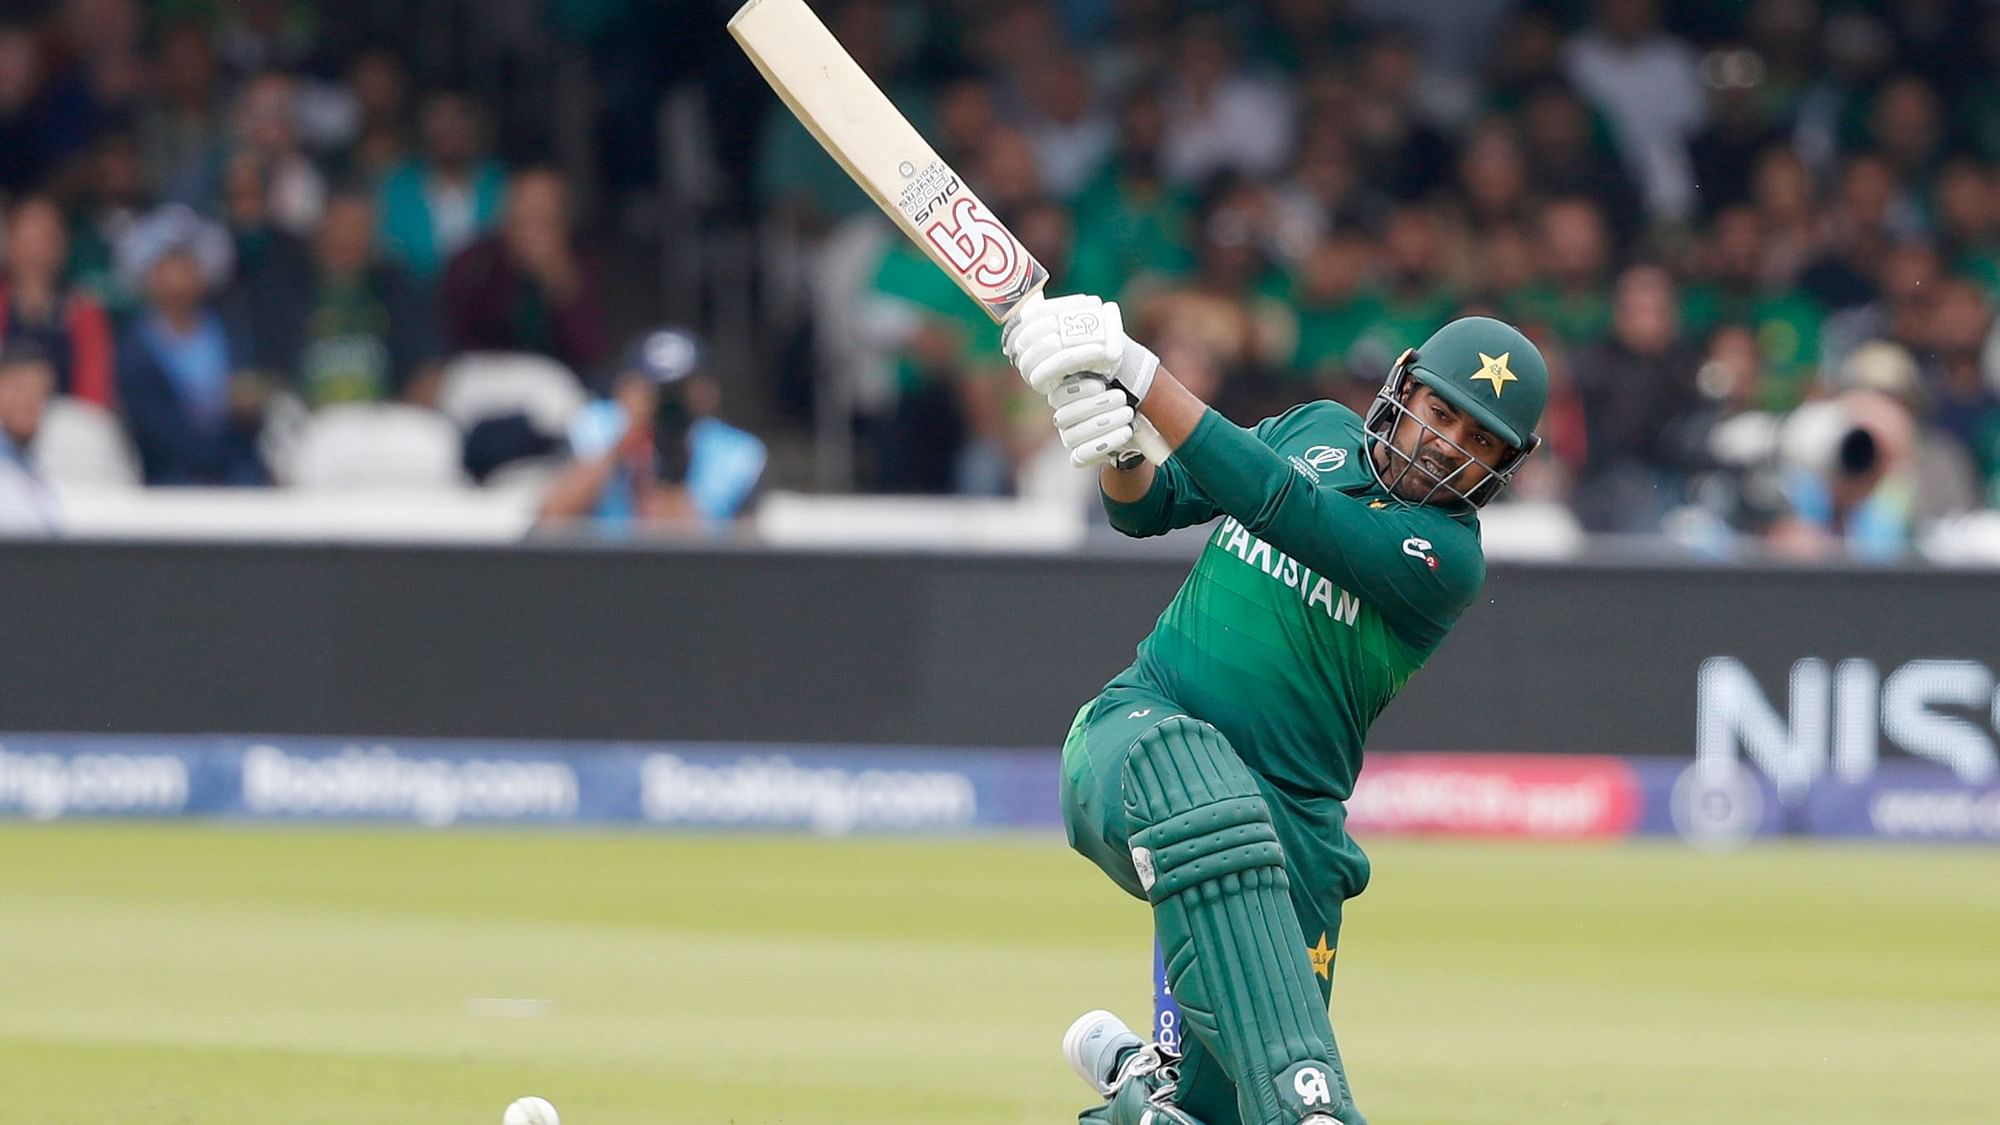 Haris Sohail instantly proved his mettle and played a brilliant knock of 59-ball 89.